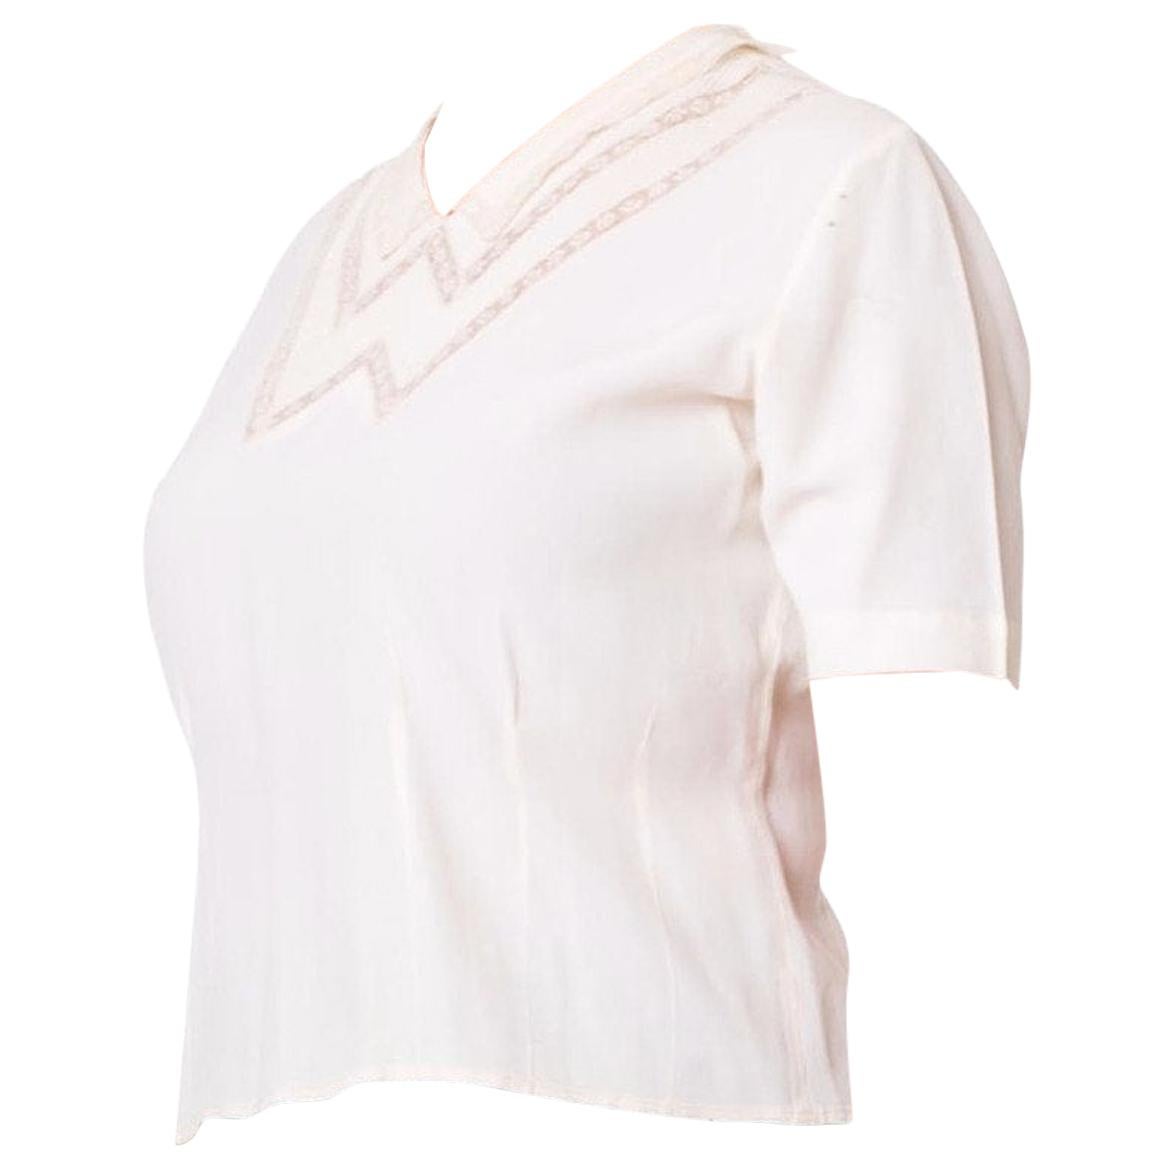 1940S  Off White Rayon Crepe Blouse With Pin-Tuck & Insertion Lace Collar